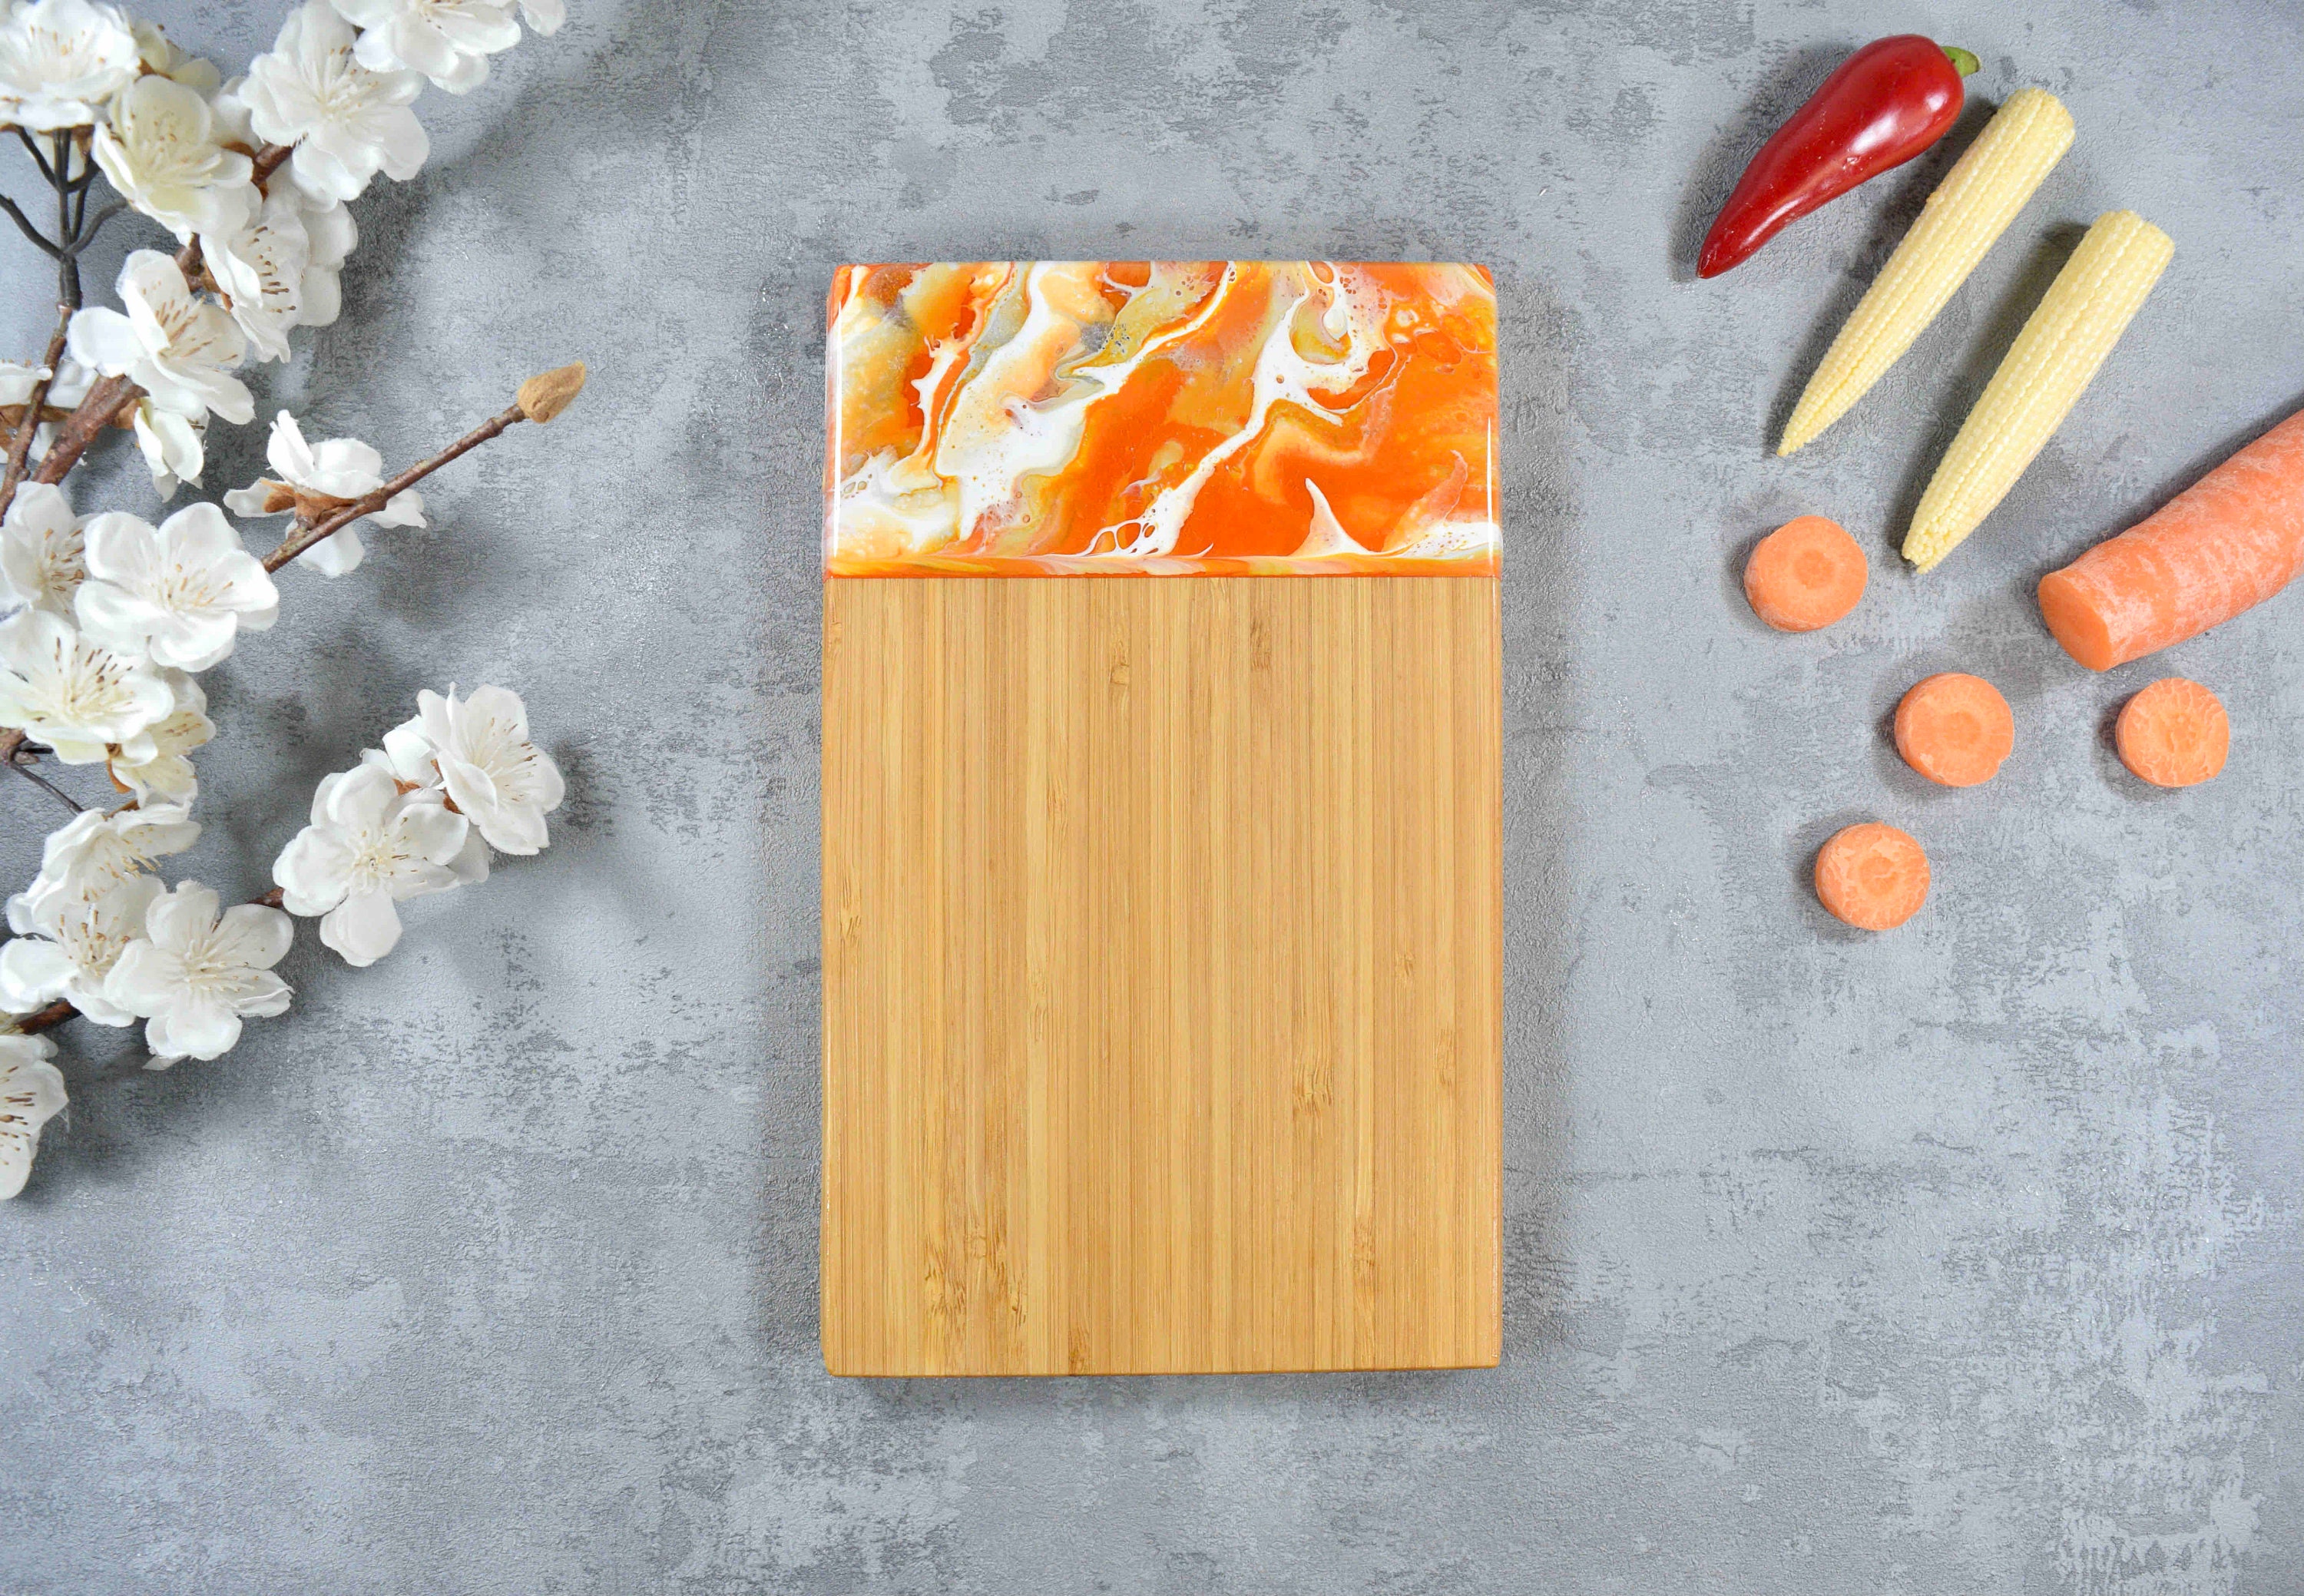 Resin Wood or Plastic Chopping Board: Which is better? - The Fifth Design